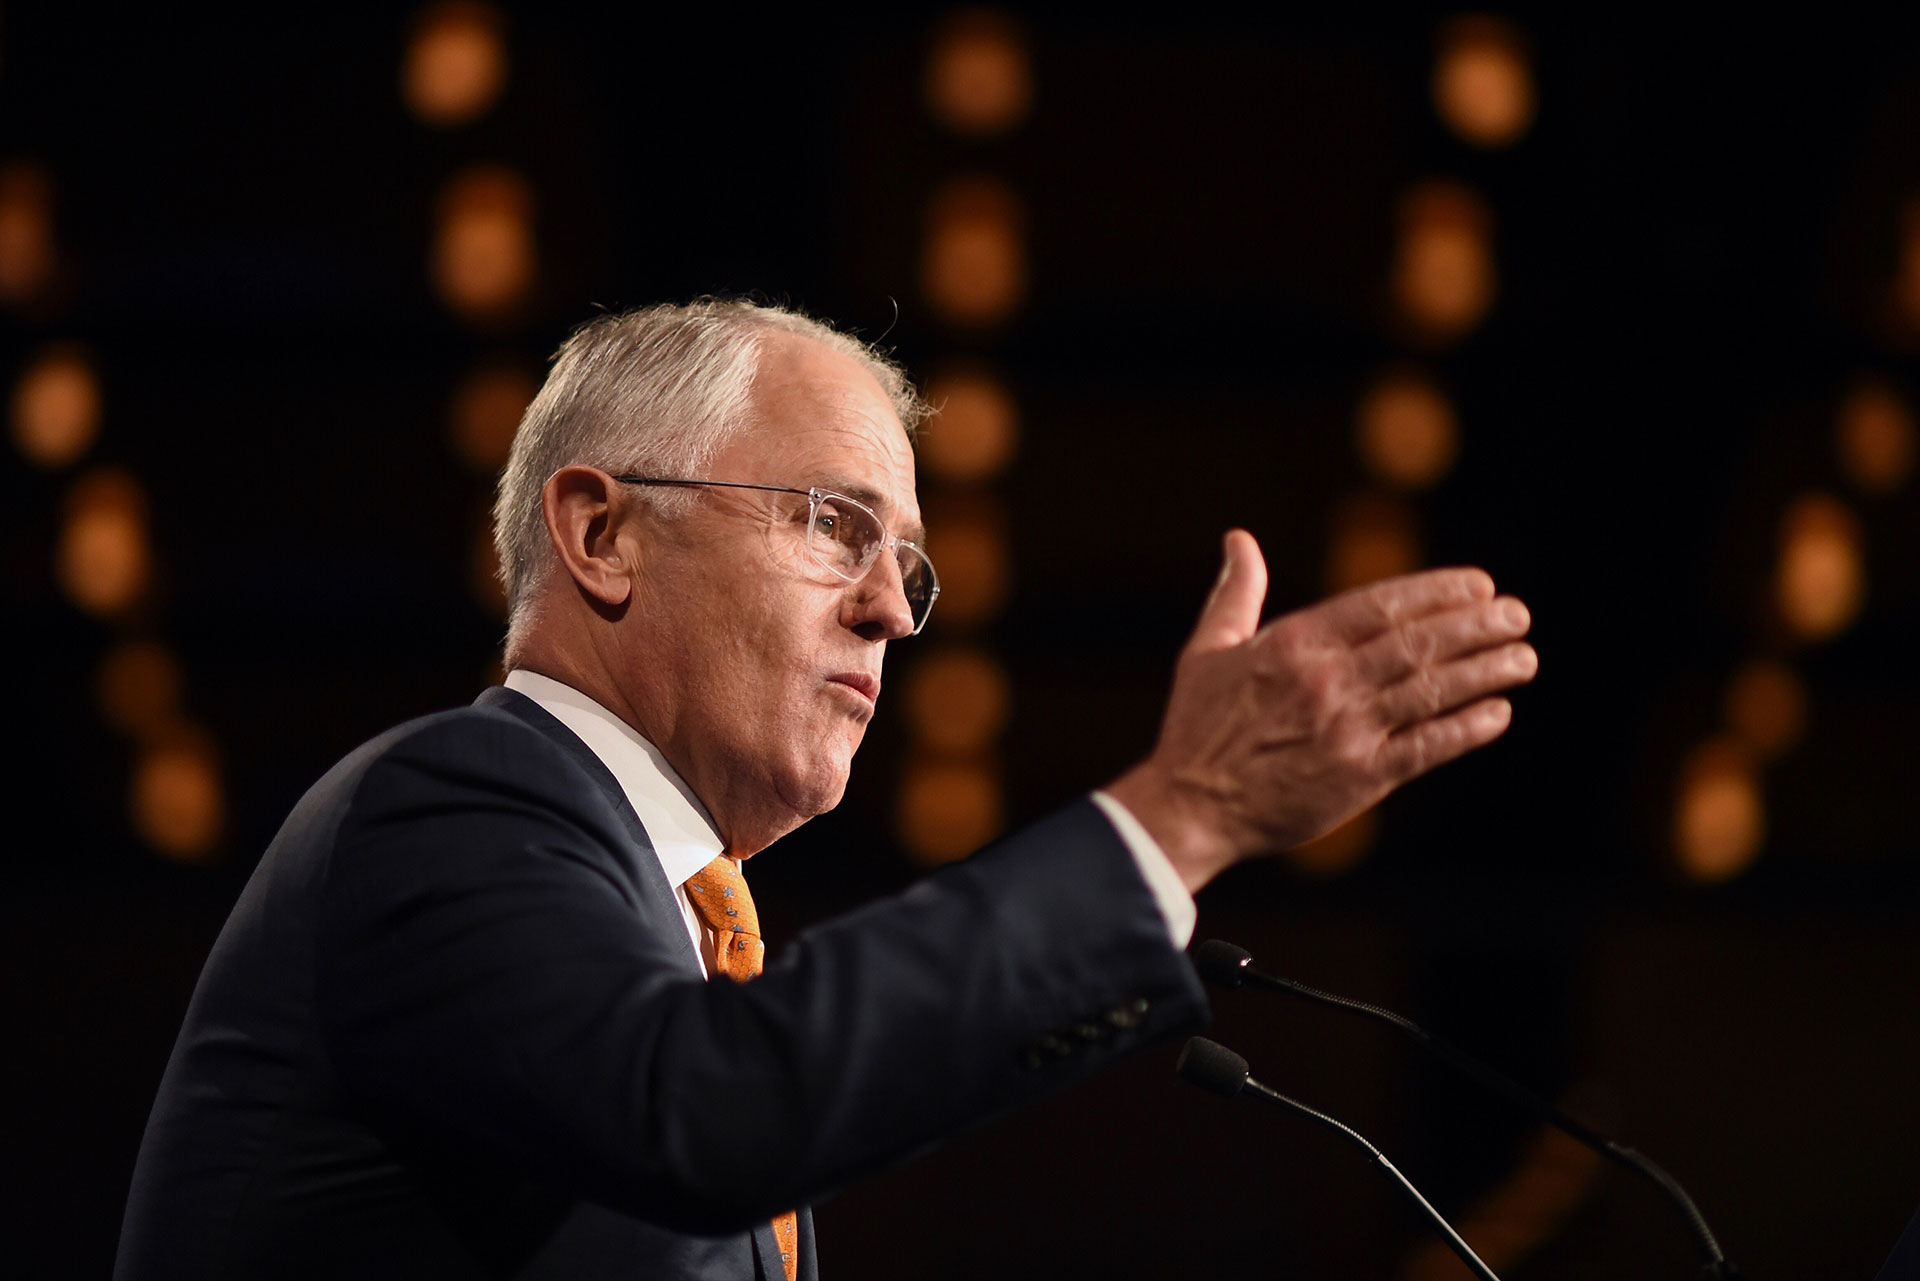 Australian Prime Minister Malcolm Turnbull addresses party supporters during a rally in Sydney, Sunday, July 3, 2016, following a general election. The elections, which pit the conservative coalition government against the center-left Labor Party, cap an extraordinarily volatile period in the nation's politics. (Lukas Coch/Pool via AP)